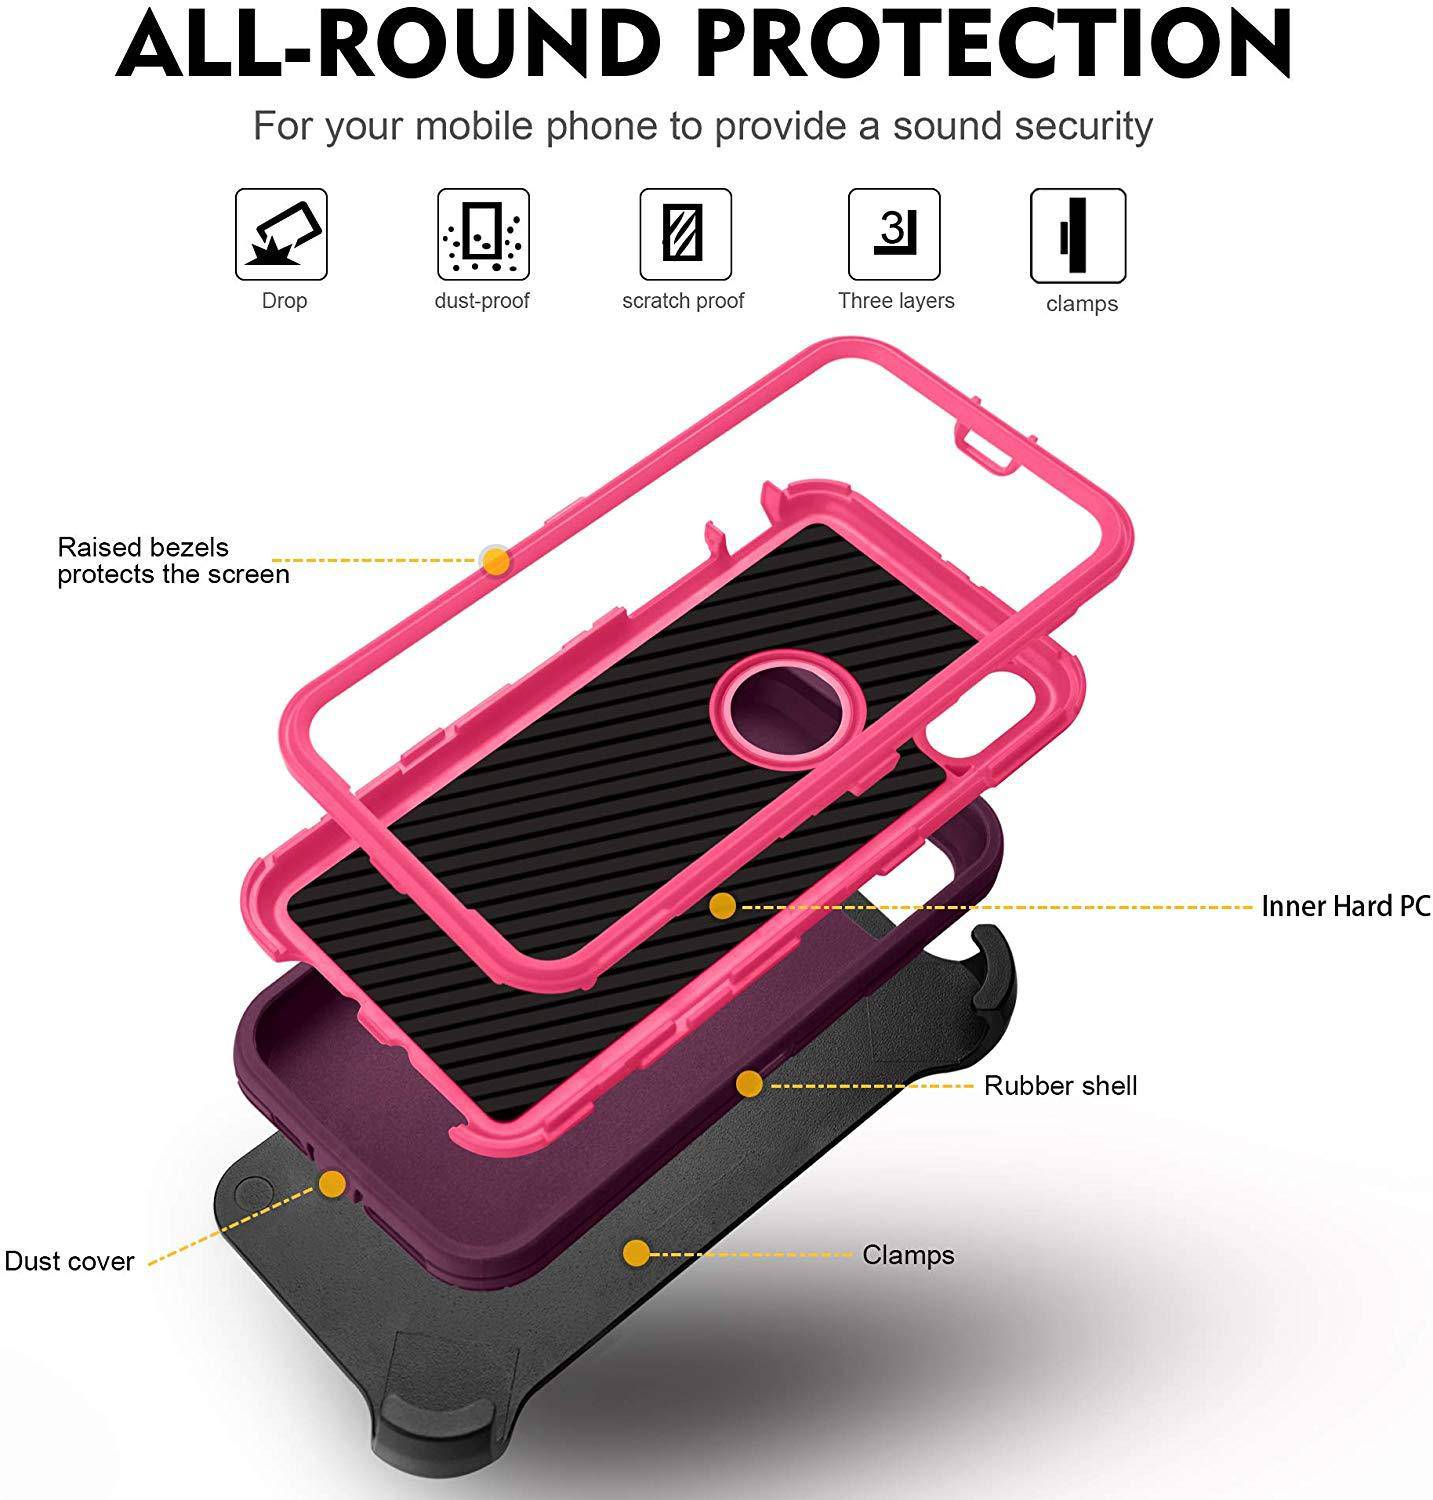 For iphone 11 Case Cover w/Screen & Holster (Clip fit Otterbox Defender)